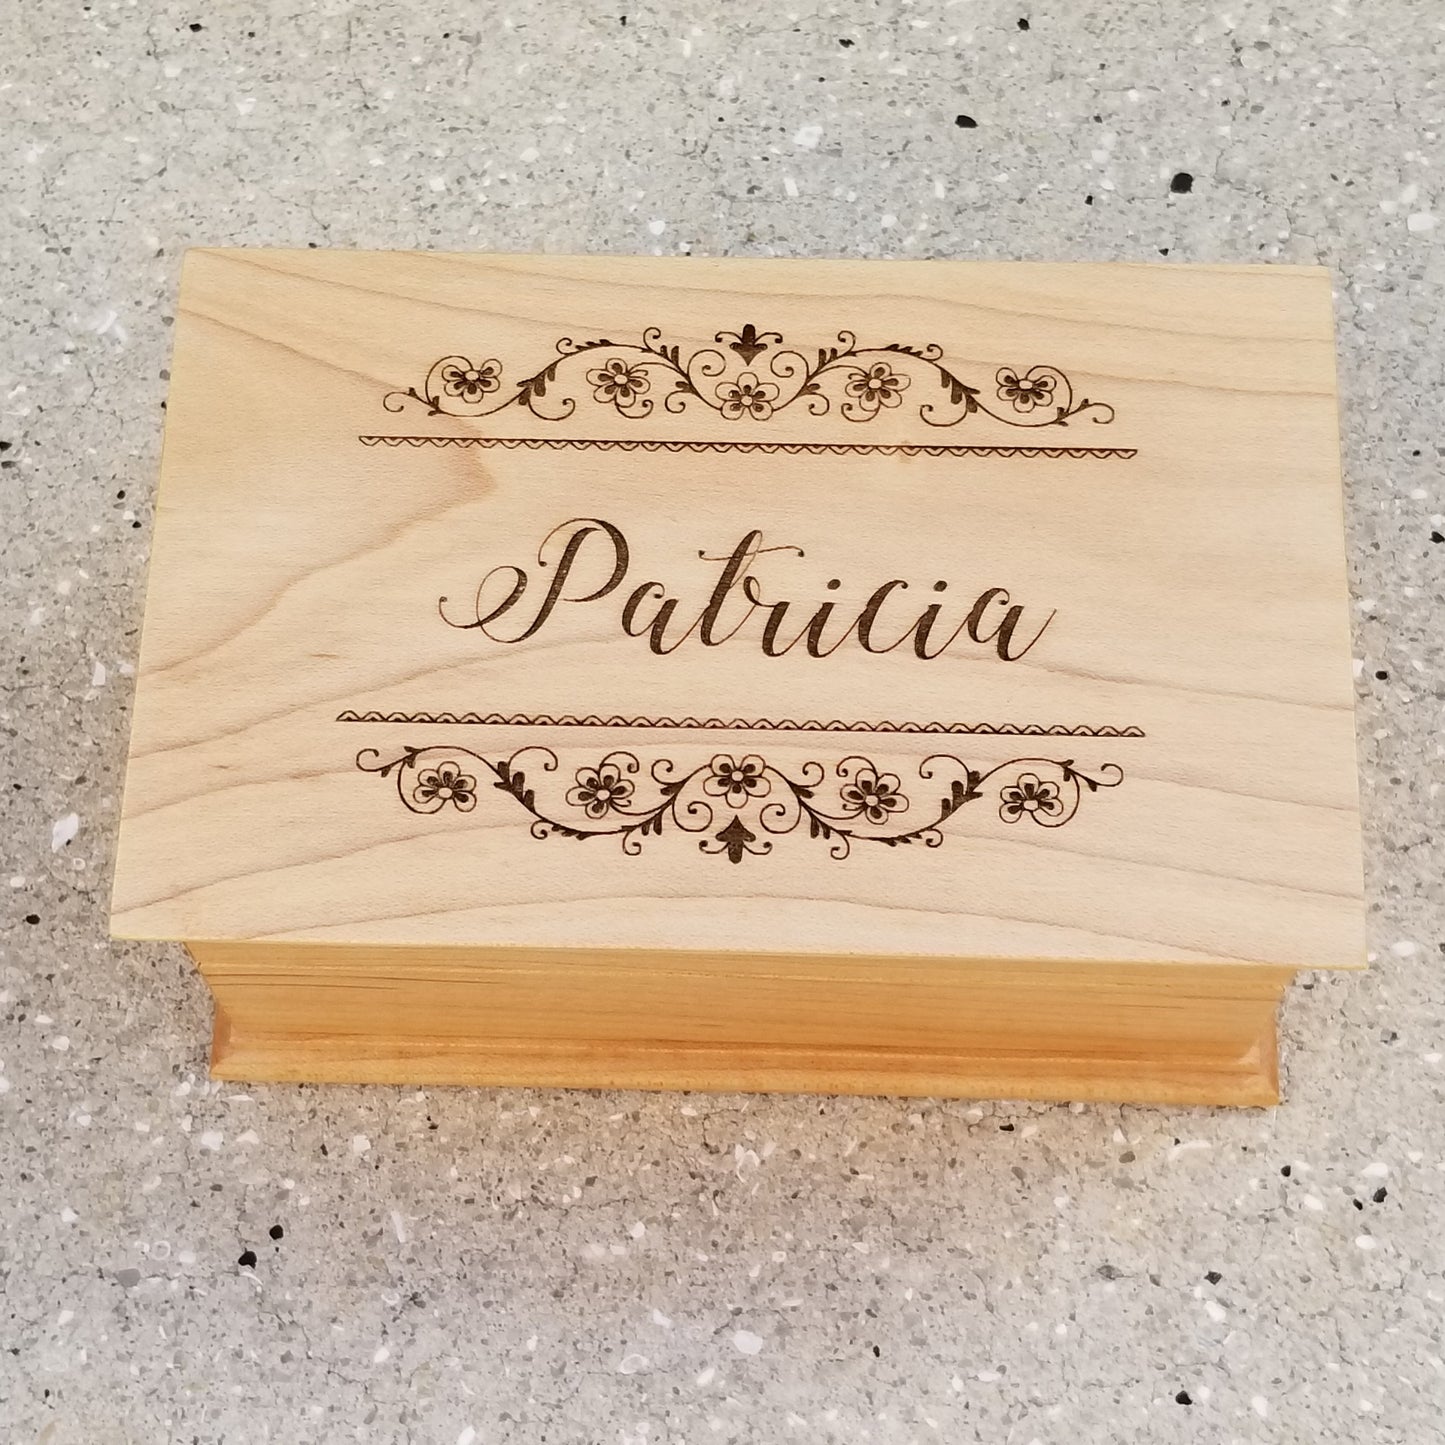 name engraved jewelry box custom-made by Simplycoolgifts